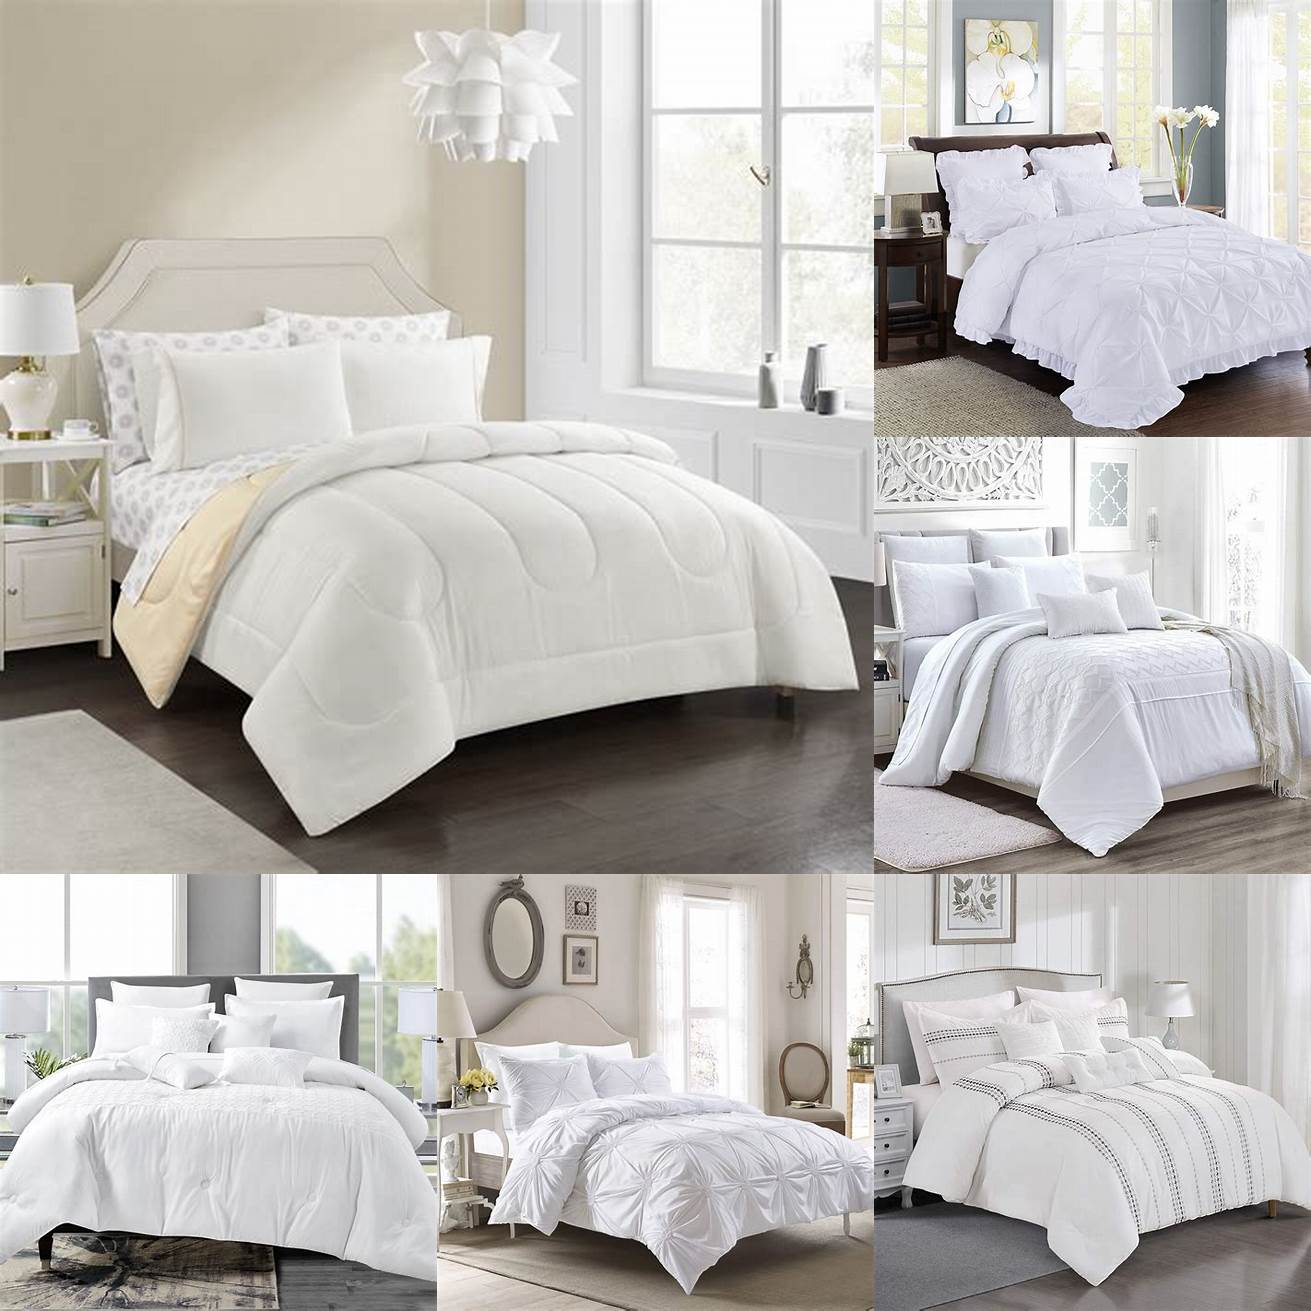 Full-sized bed with white bedding